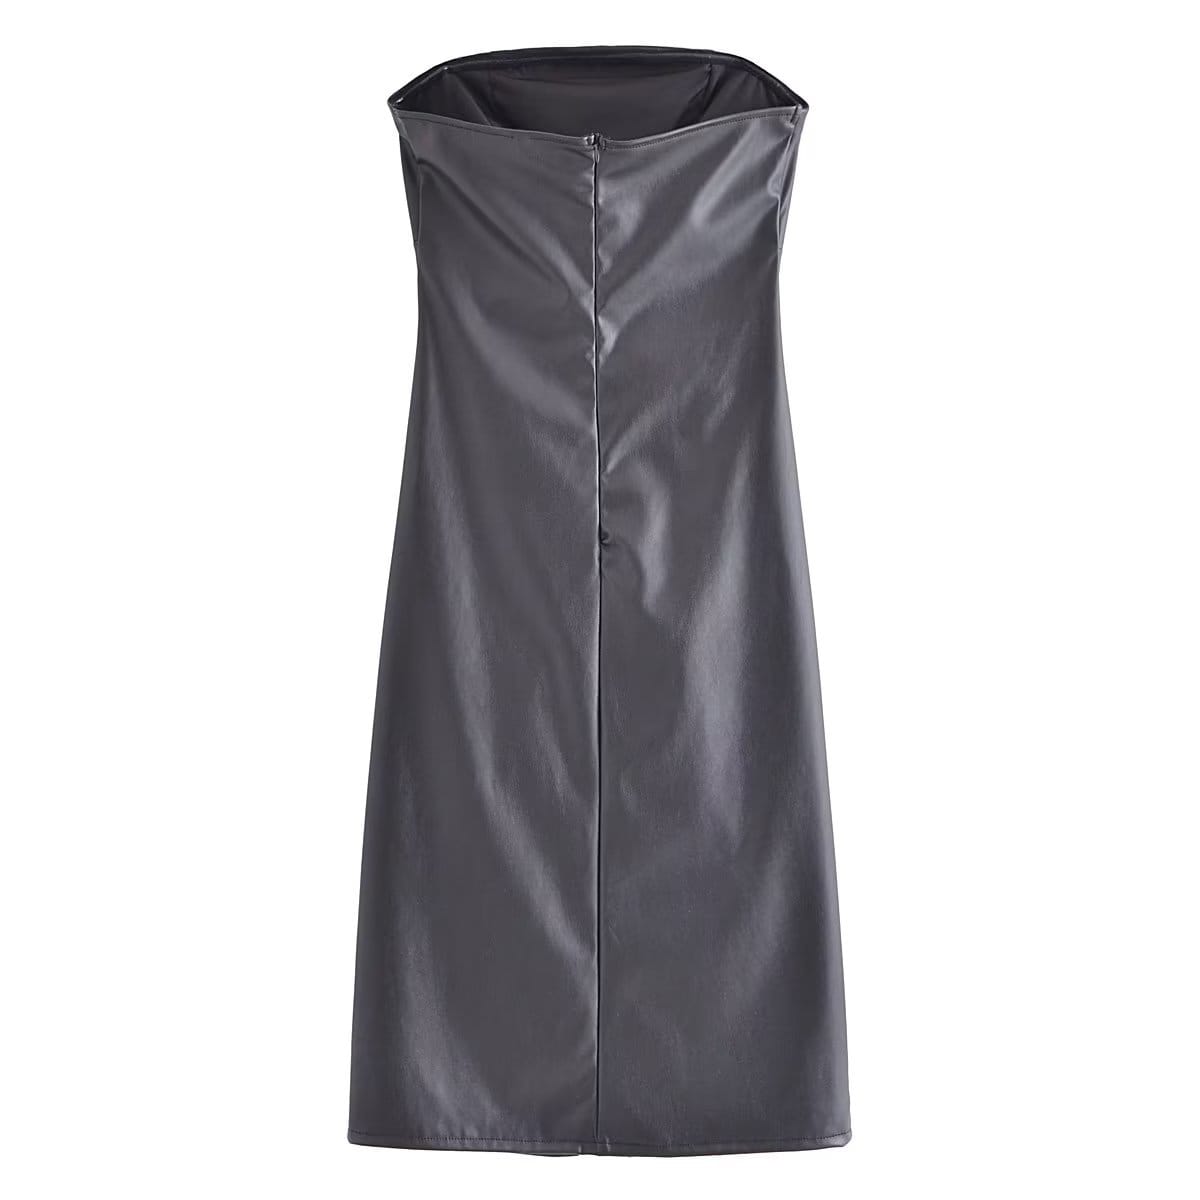 Strapless Ruched Midi Dress - Faux Leather Elegance Party Perfection